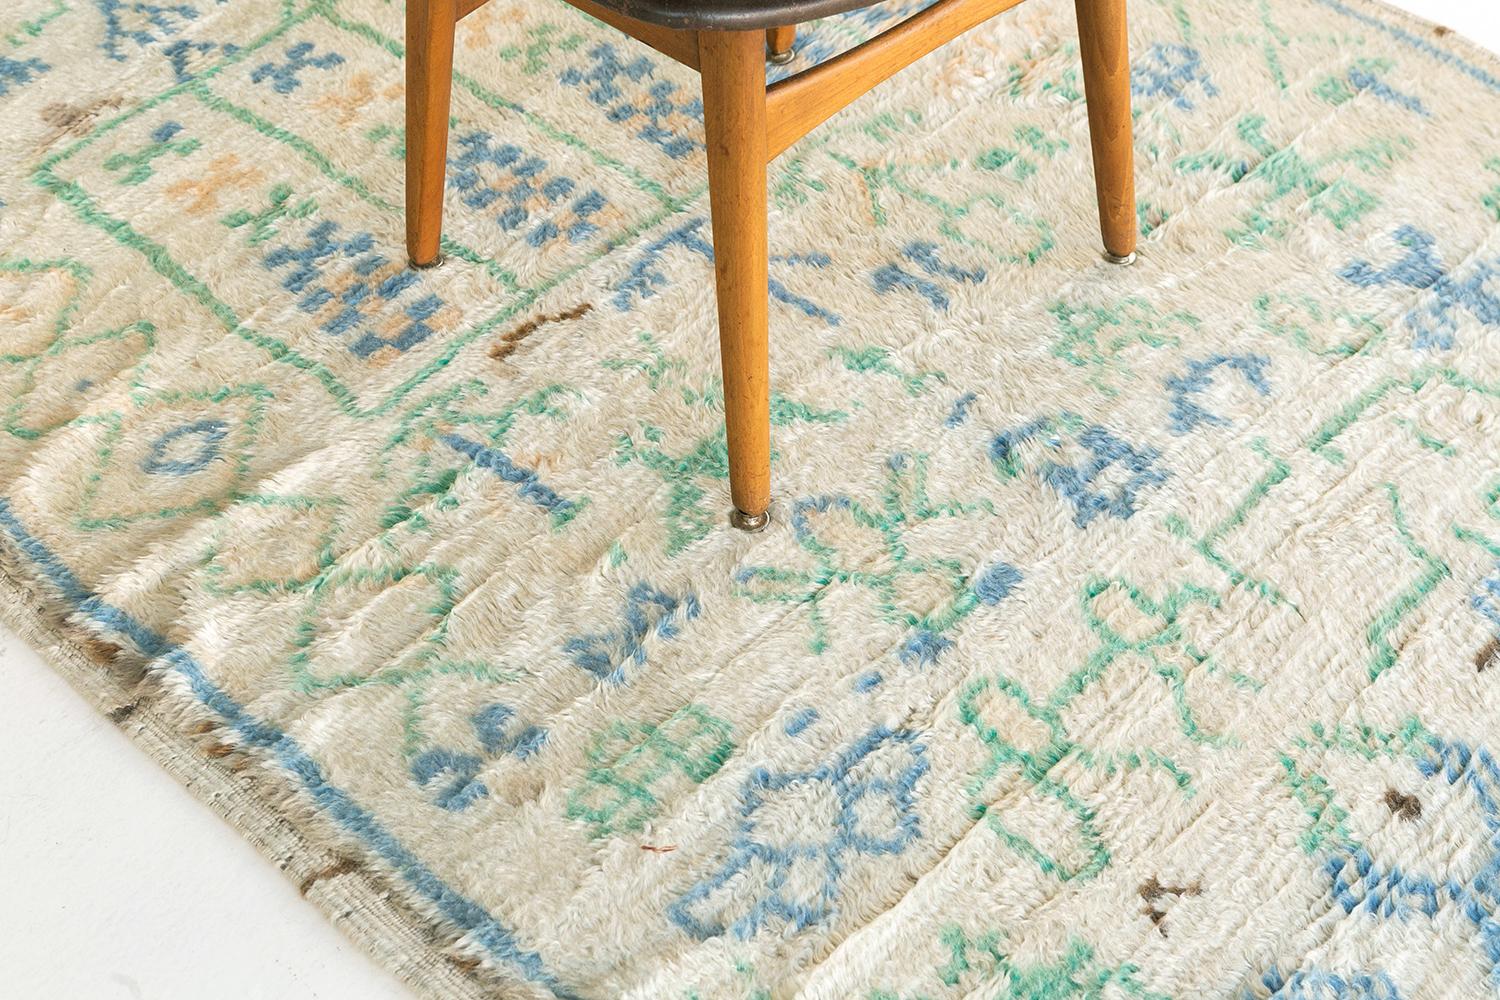 Ivory ground with cheerful azure, emerald, and golden details. Agrarian motifs include human and animal figures. The composition is axial and directional, buzzing with life. A vintage Berber lyric from the Atlas Mountains.

Rug